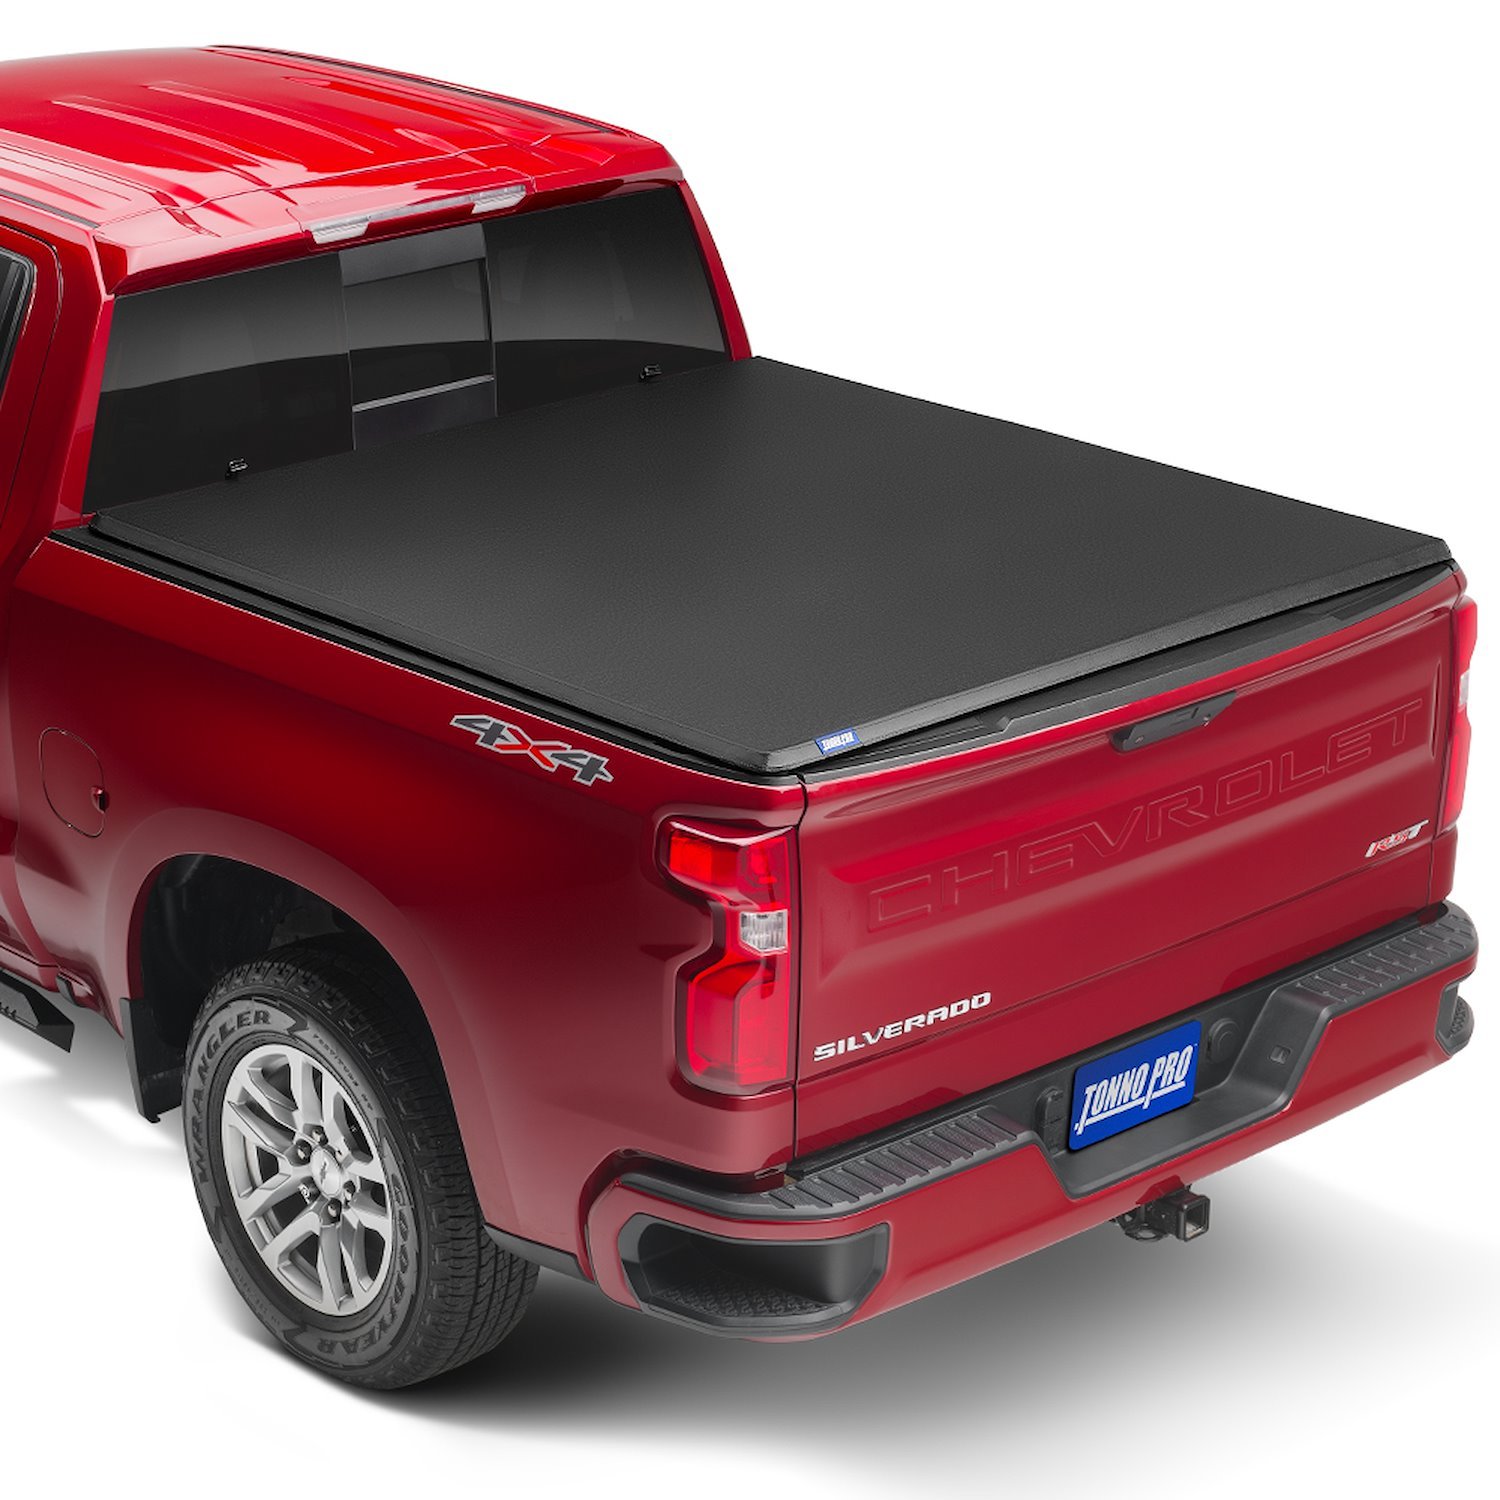 Hard Fold Tri-Fold Tonneau Cover Fits Select GM Silverado/Sierra 2500 HD, 3500 HD Trucks [8 ft. 2 in. Bed without Side Boxes]